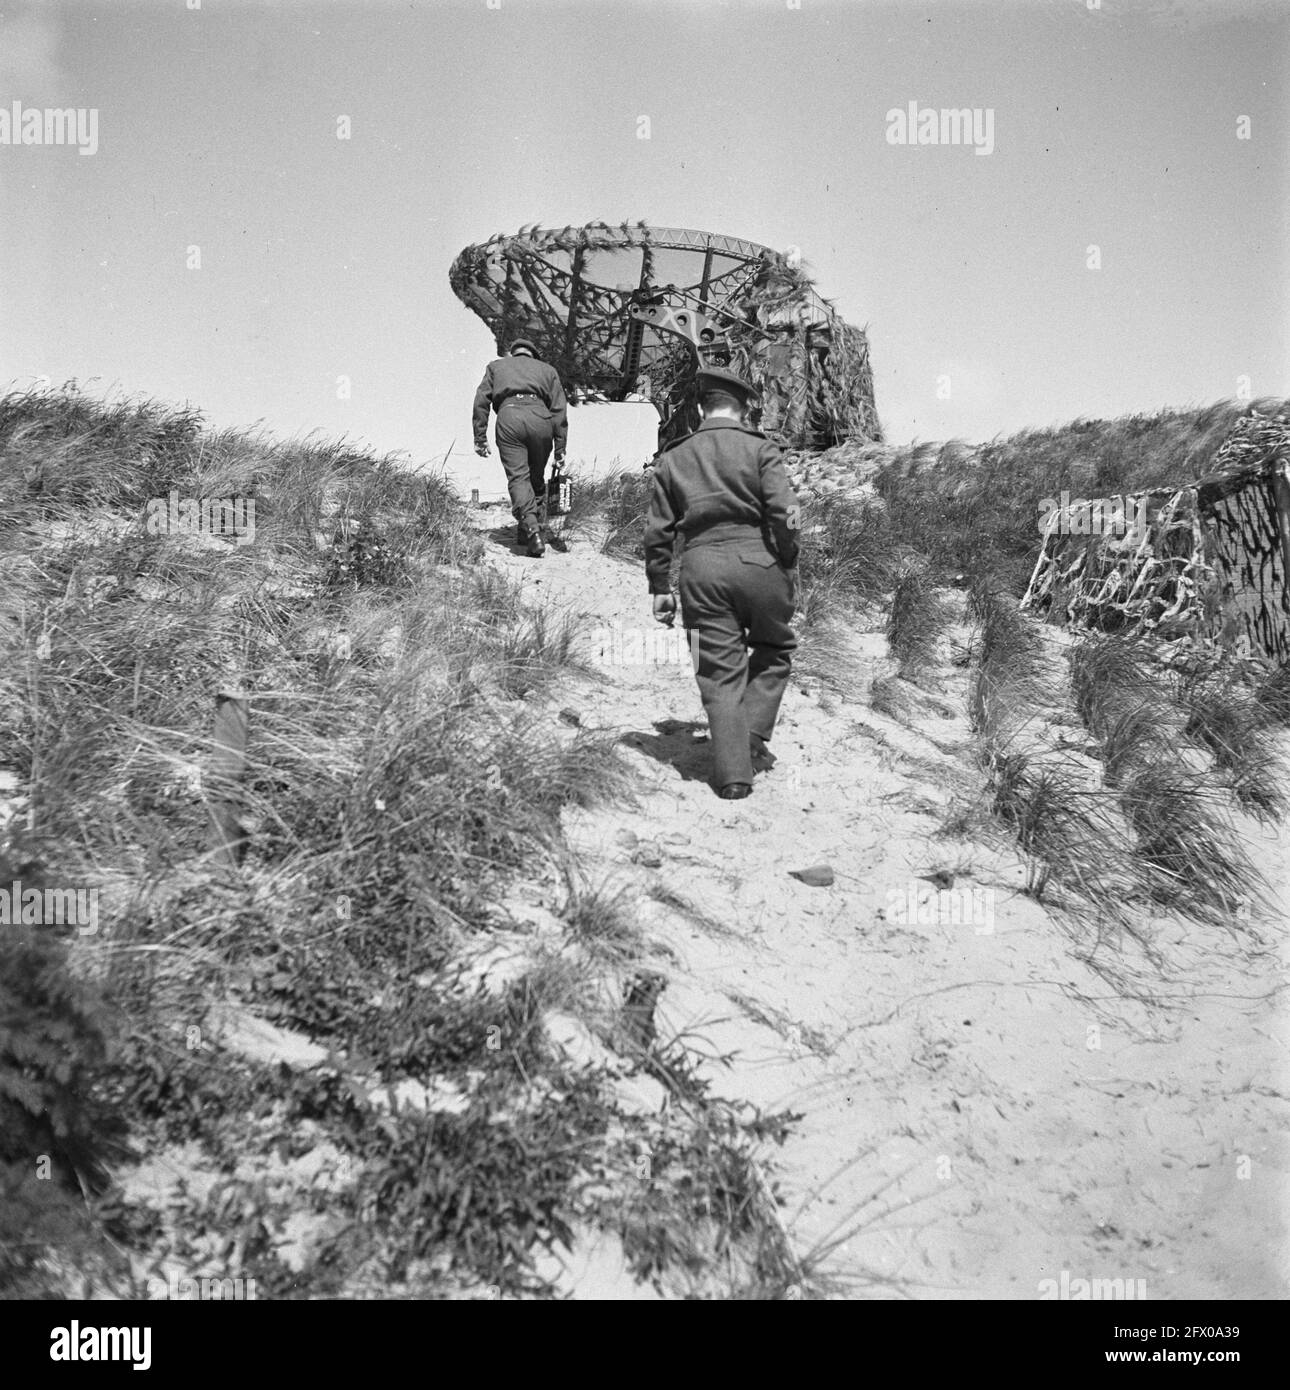 [Series: Demolishing the Atlantic Wall]. Between Zandvoort and IJmuiden the Atlantic Wall is being cleared. Cannons are dismantled, bunkers are blown up and mines cleared. A German Wurzburg-Riese radar antenna, June 1945, military, radars, second world war, fortifications, The Netherlands, 20th century press agency photo, news to remember, documentary, historic photography 1945-1990, visual stories, human history of the Twentieth Century, capturing moments in time Stock Photo